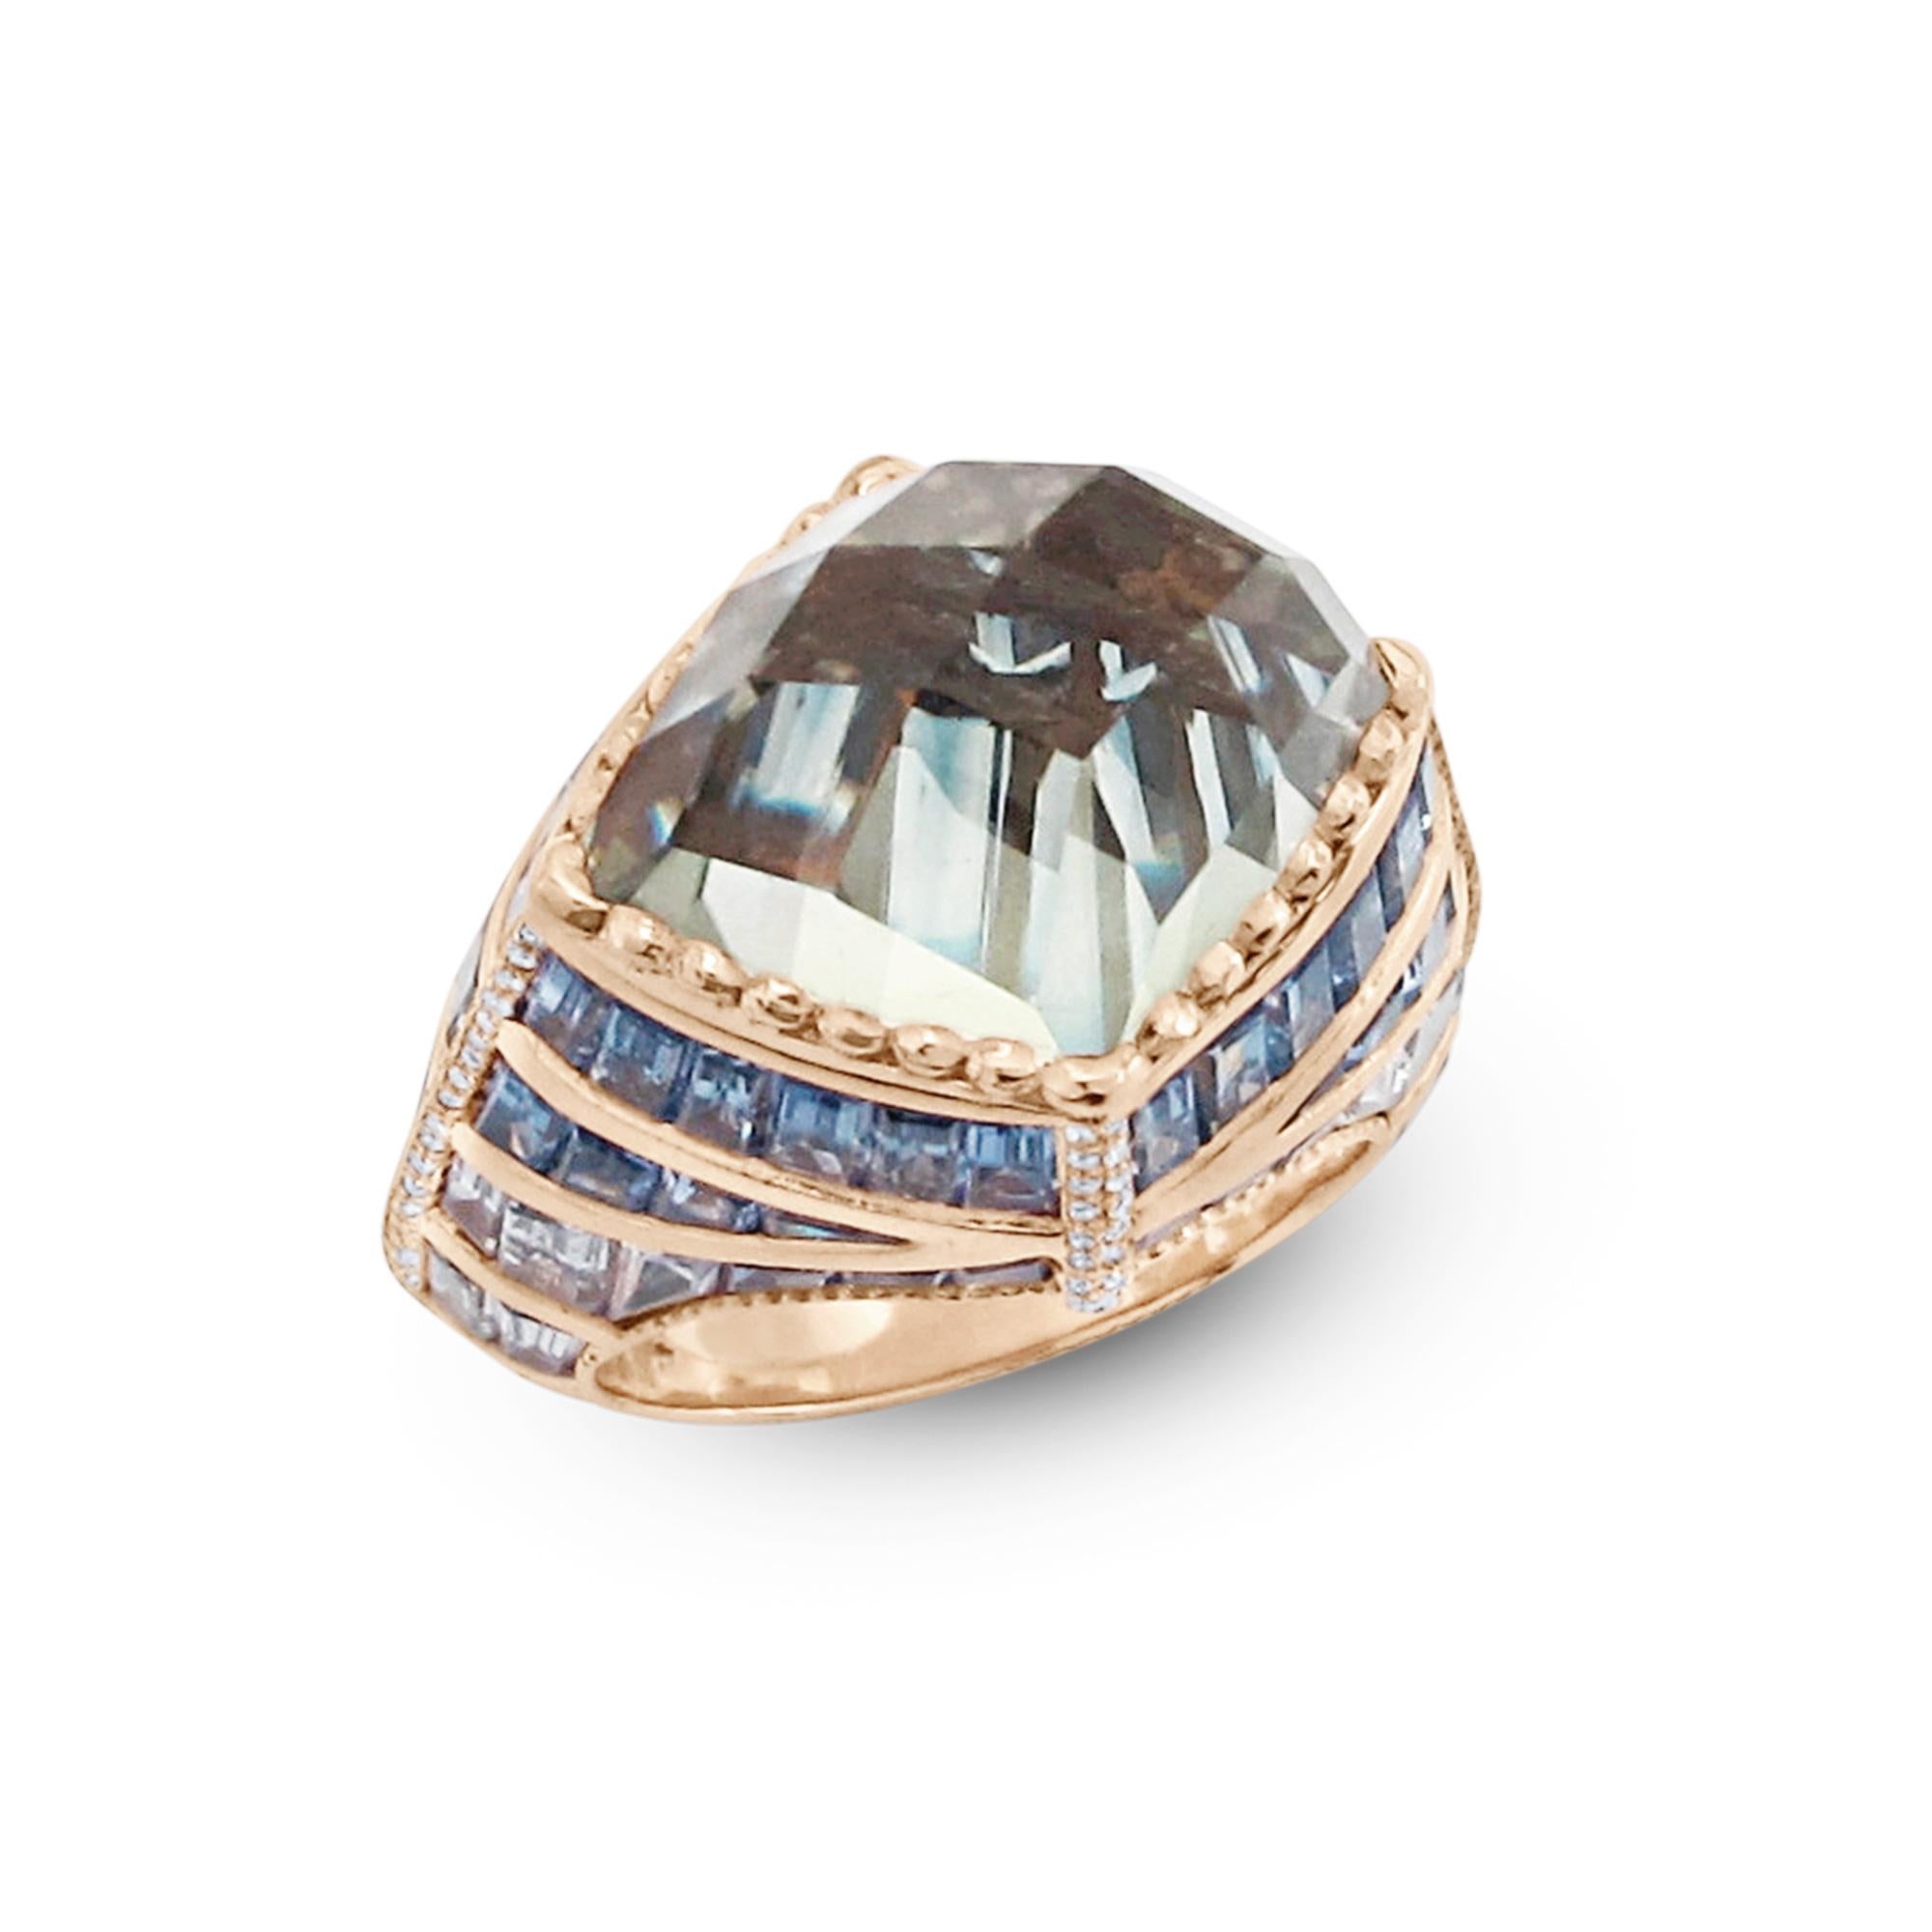 Enairo 18k Gold Blue Sapphire green Amethyst Diamond Cocktail Ring

This powerful piece is made of 18k rose gold and set with:

- 21.90 carats of delicate blue baguette cut sapphires
- Green Amethyst 10.27 ct. Faceted Cabochon
- White